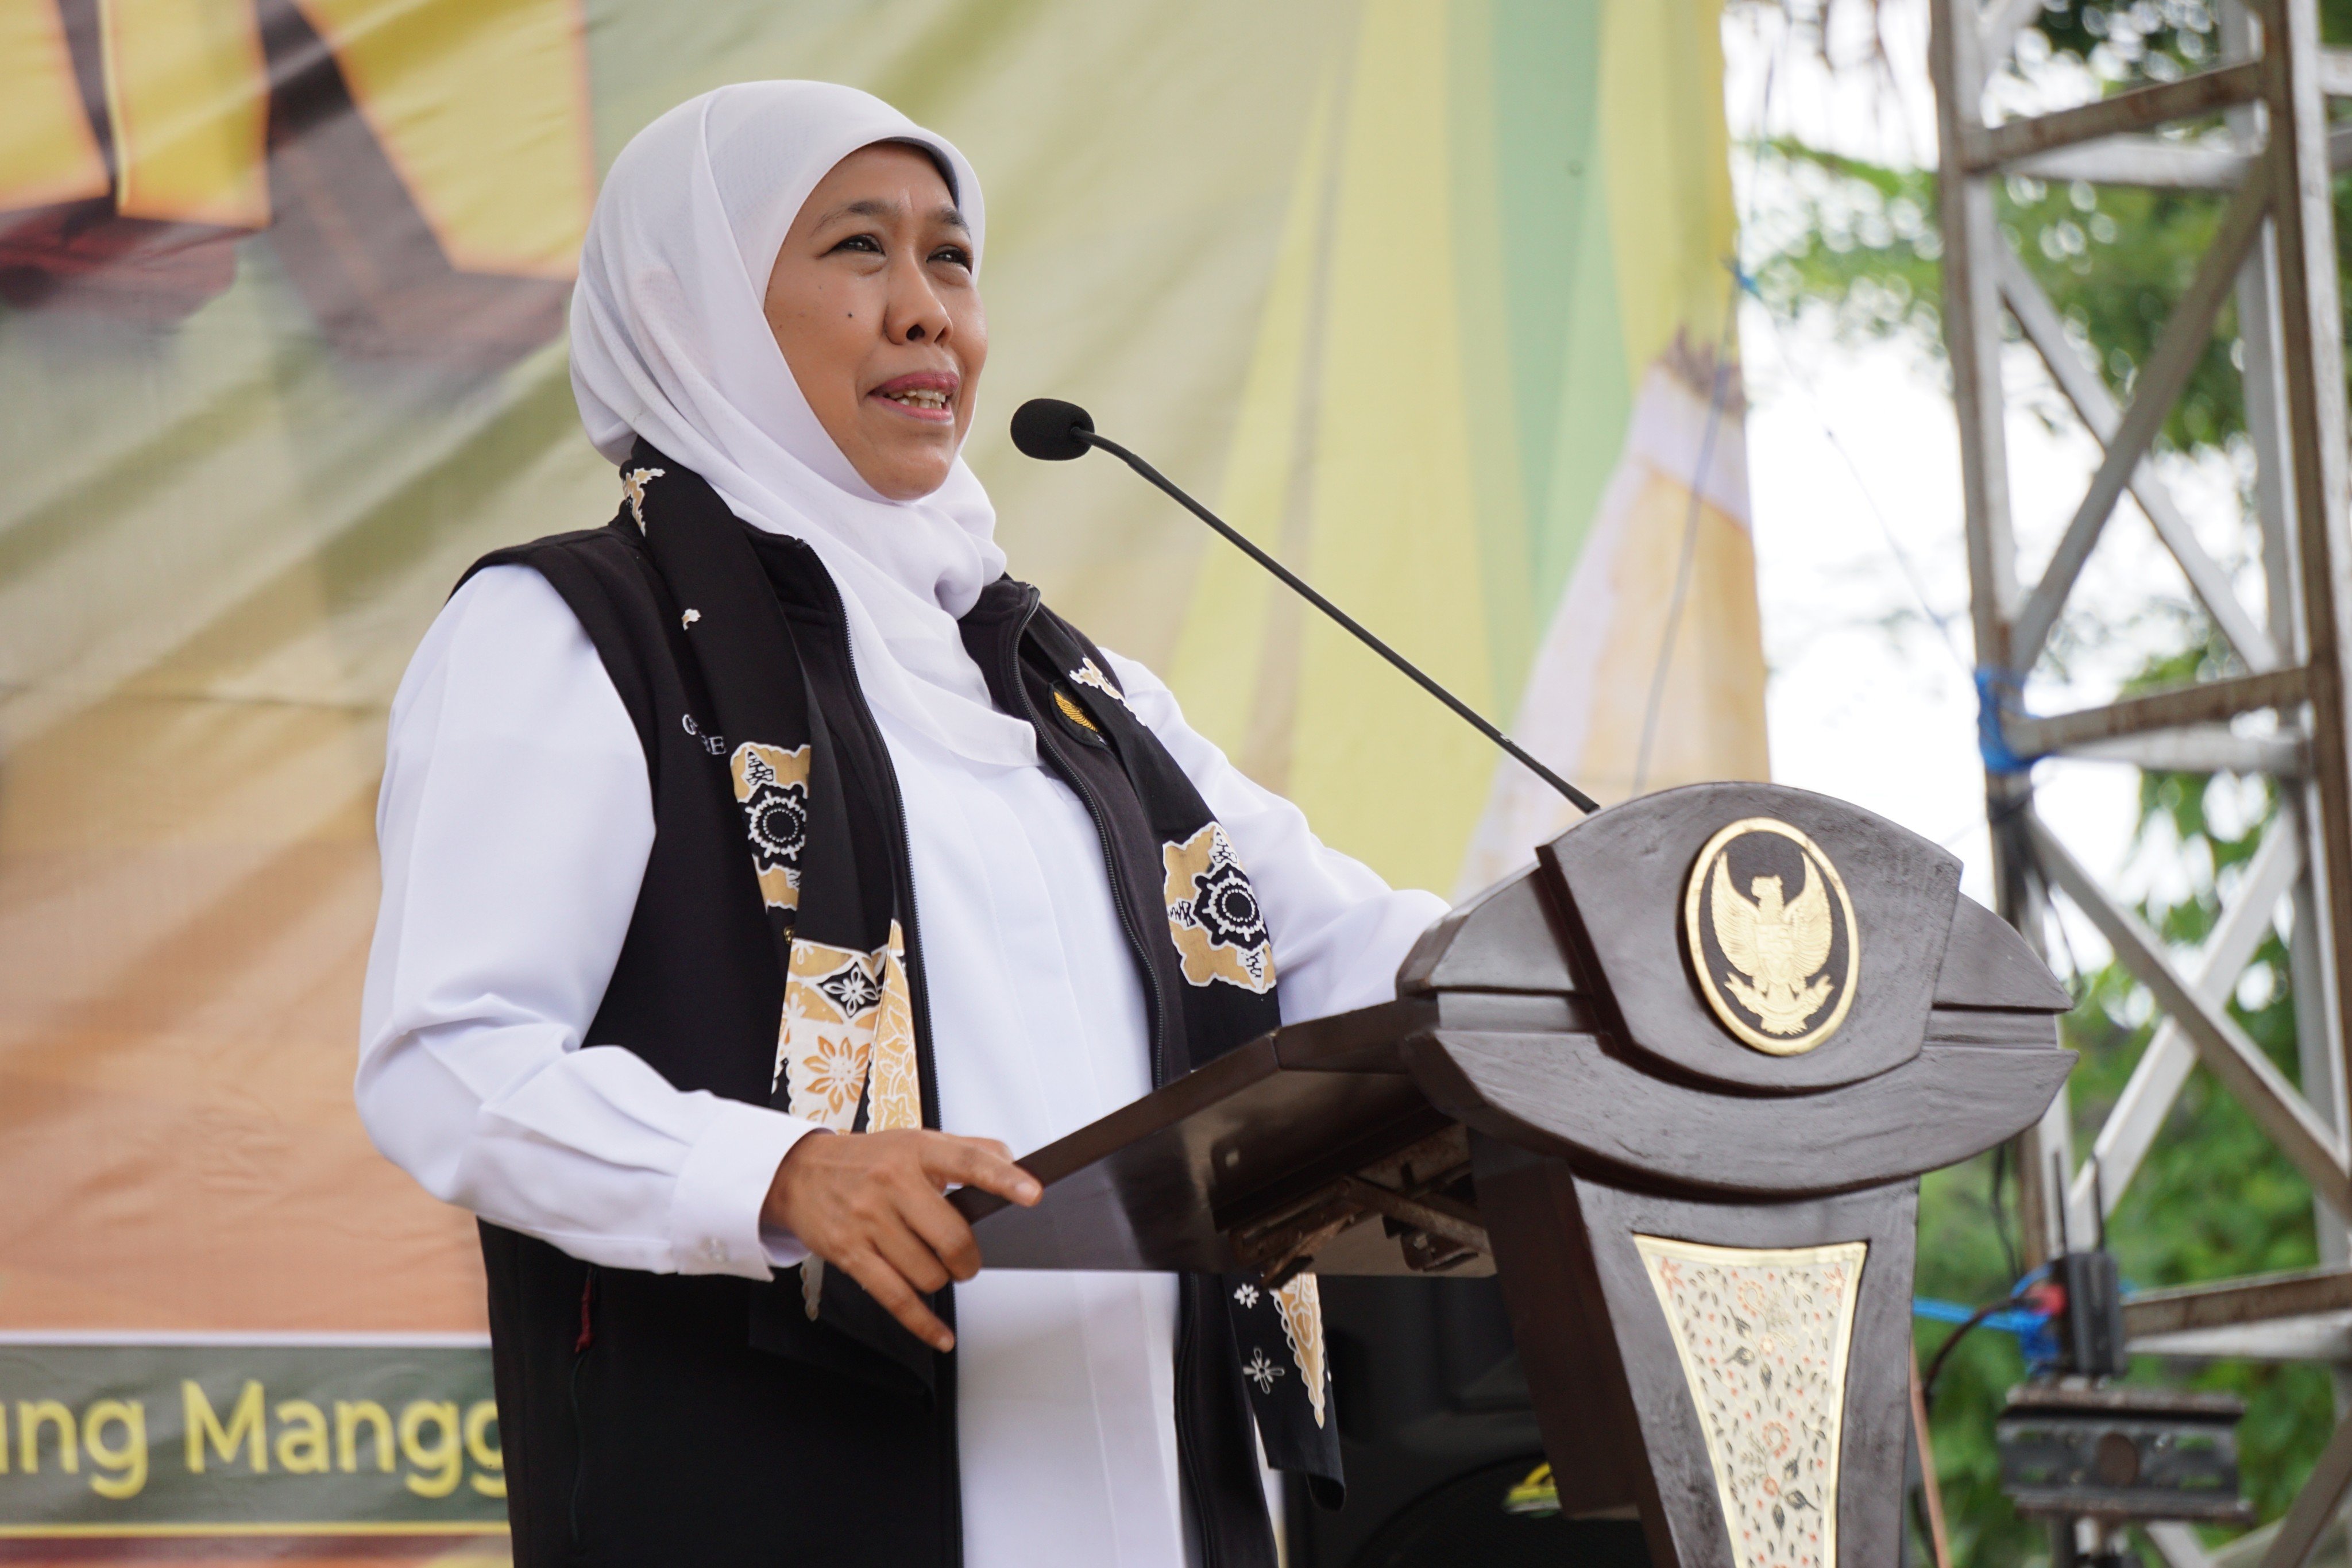 Khofifah Indar Parawansa, governor of East Java, speaks at a festival in Blitar on February 12, 2022. As a senior leader in Nahdlatul Ulama, the largest Islamic organisation in the world’s biggest Muslim nation, Khofifah’s influence extends to vote banks beyond East Java. Photo: Shutterstock